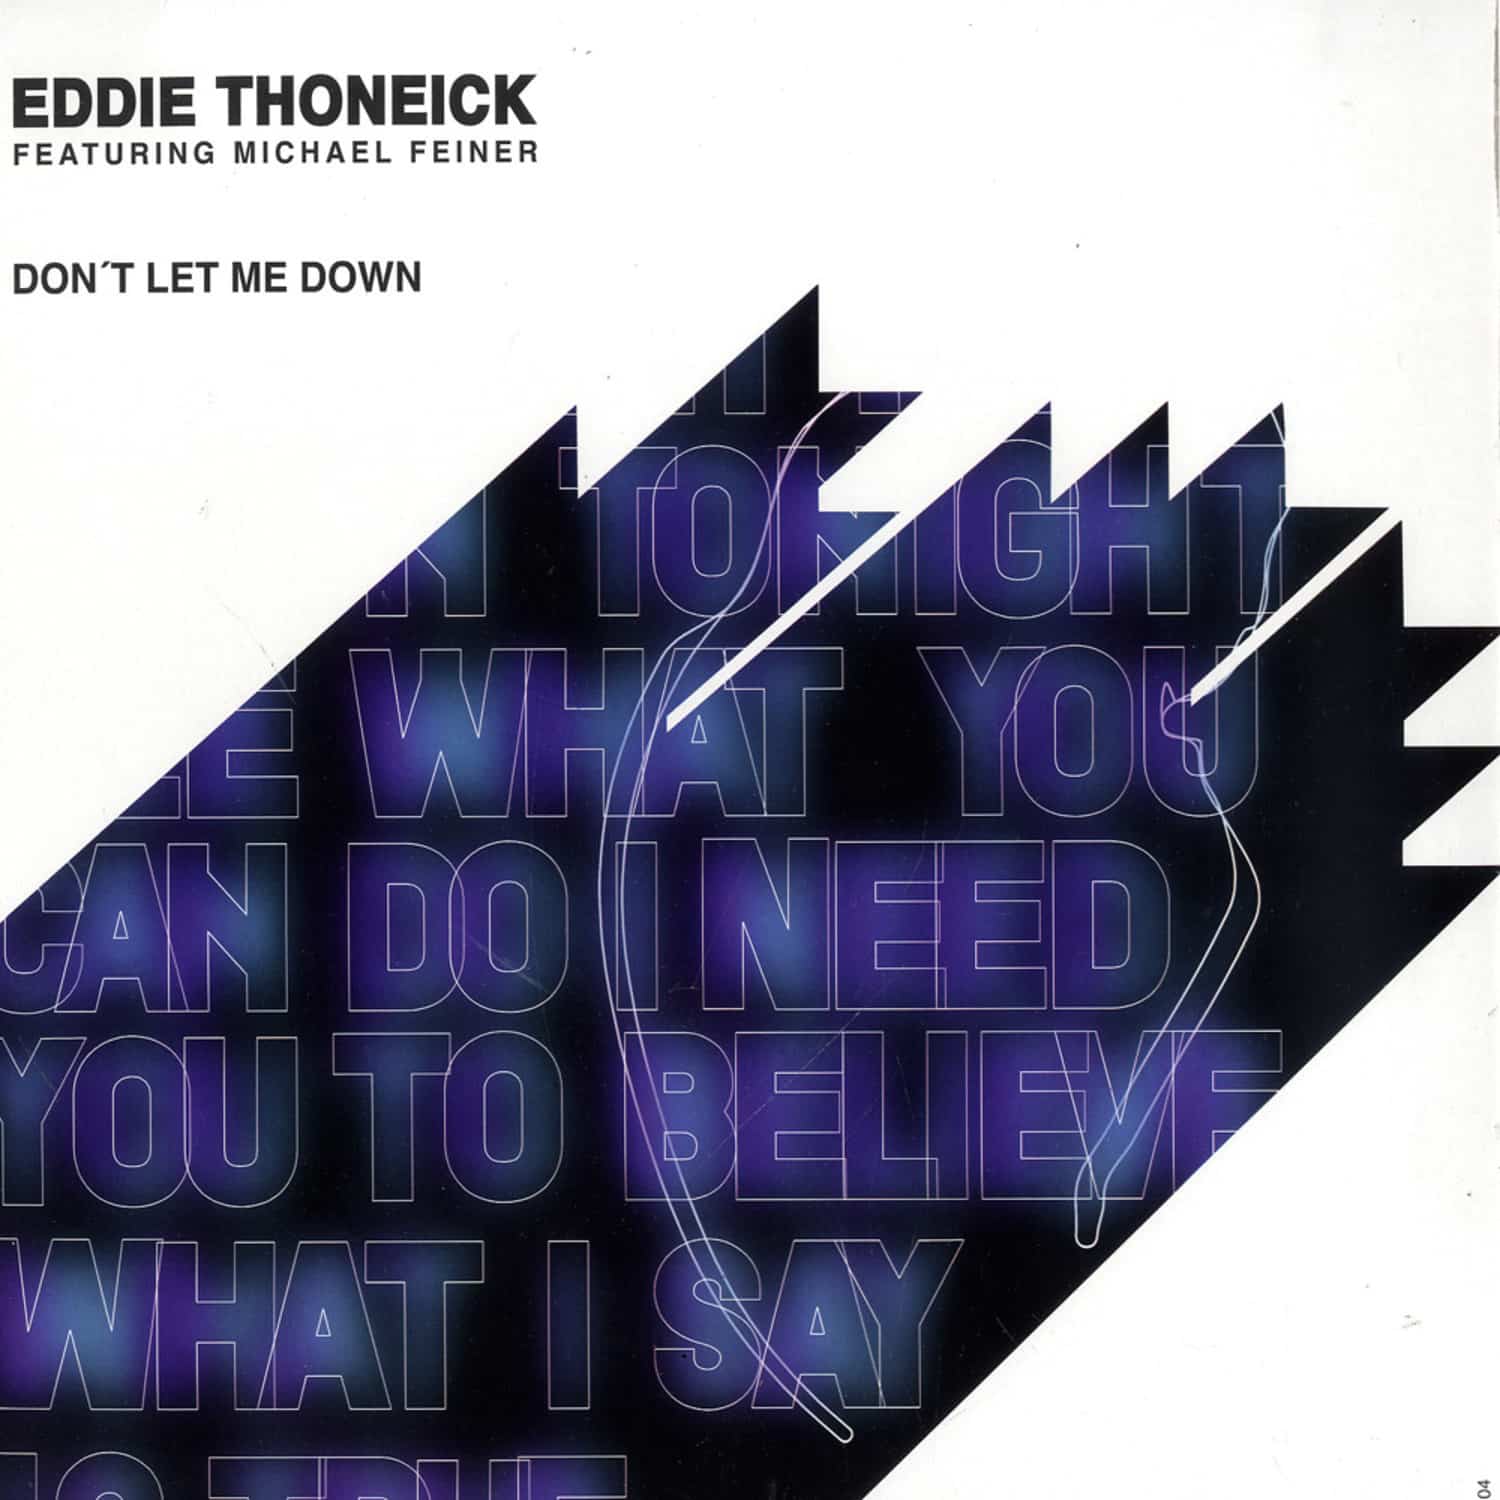 Eddie Thoneick - DONT LET ME DOWN